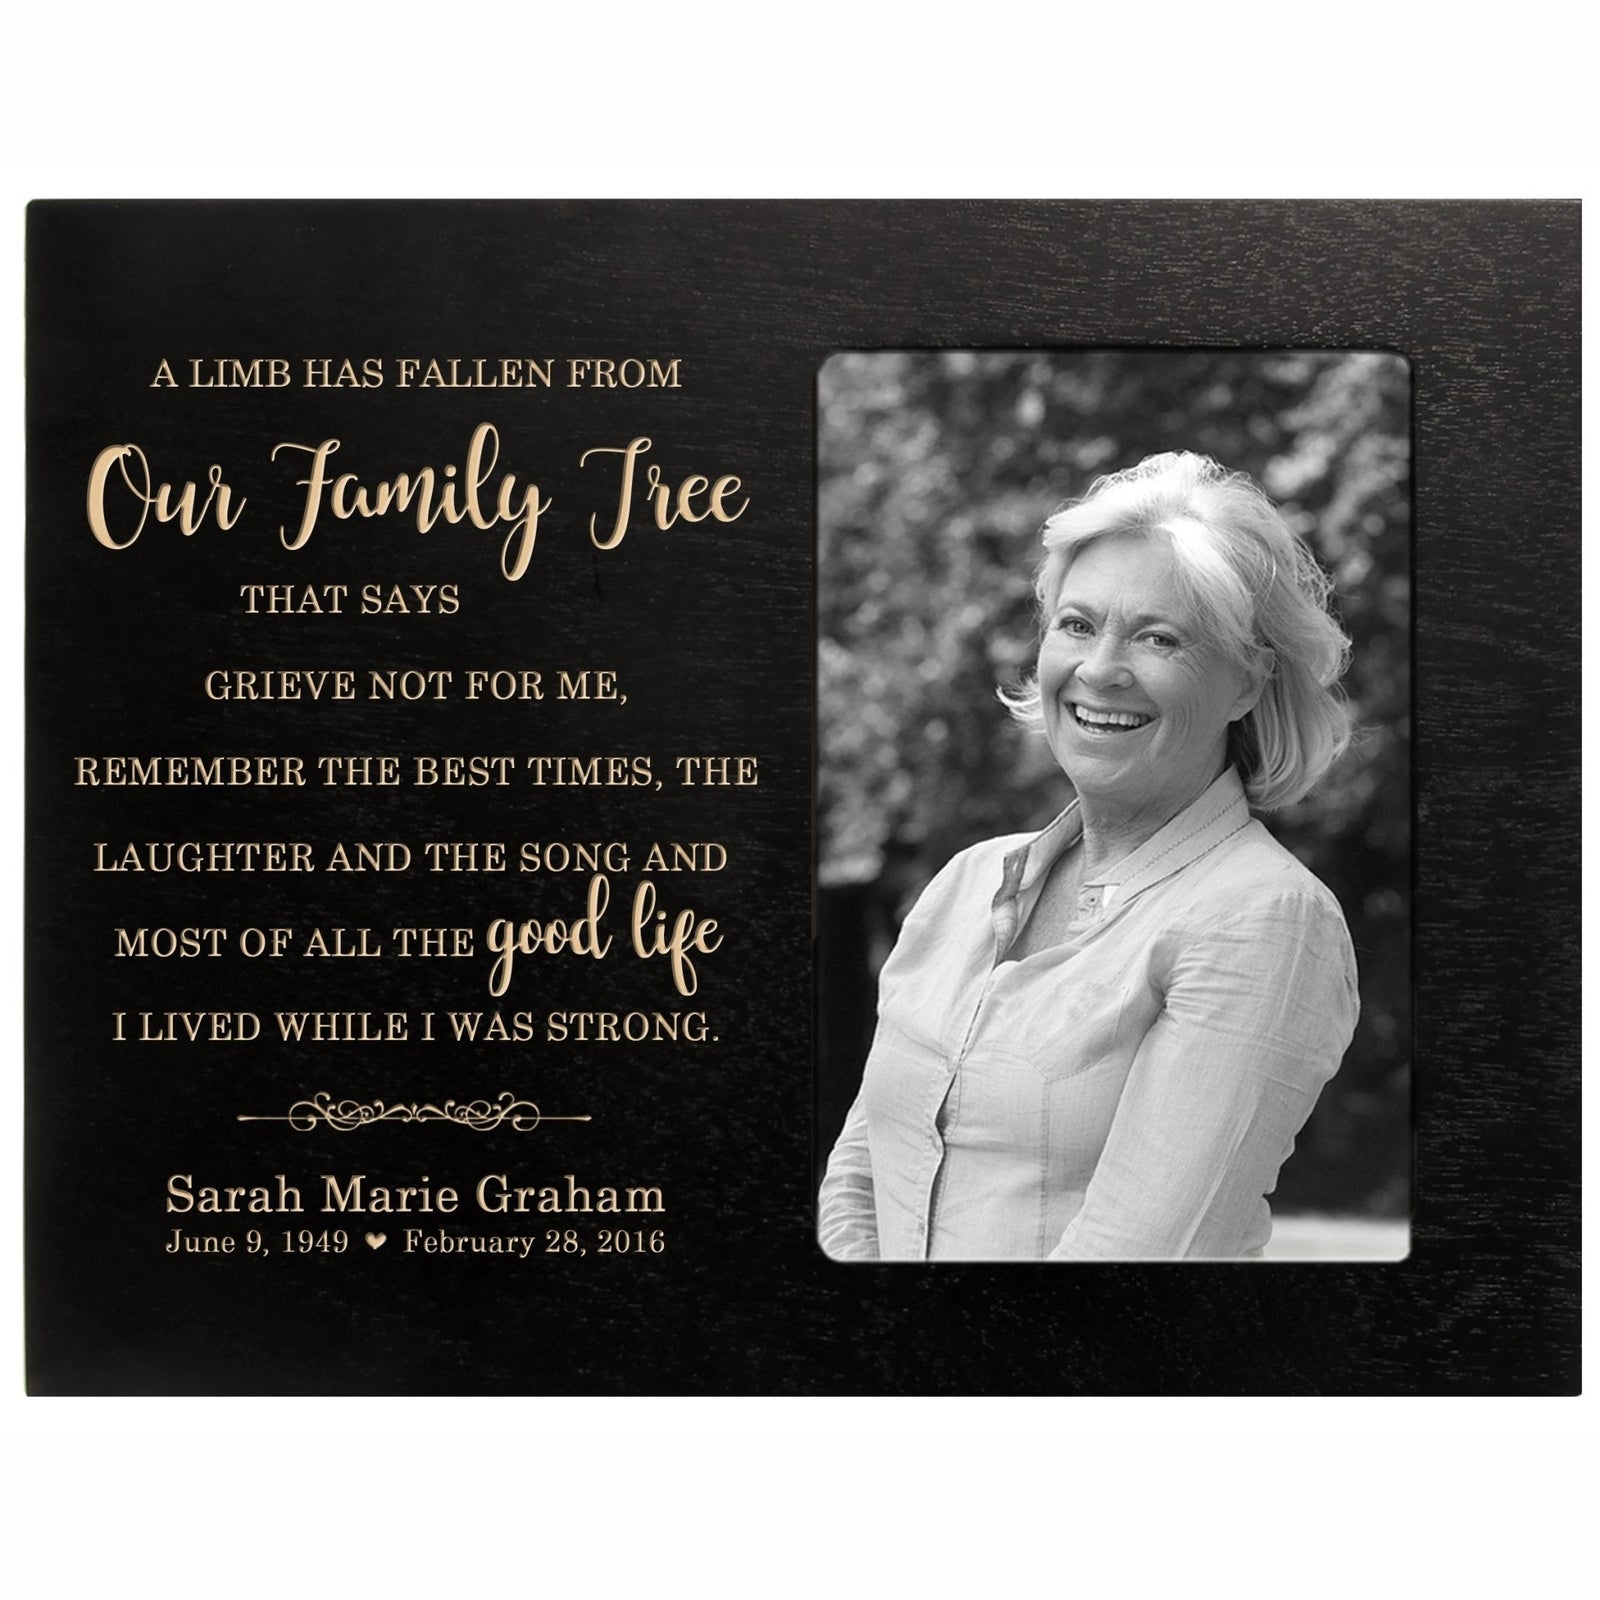 Personalized Horizontal 8x10 Wooden Memorial Picture Frame Holds 4x6 Photo - A Limb Has Fallen - LifeSong Milestones